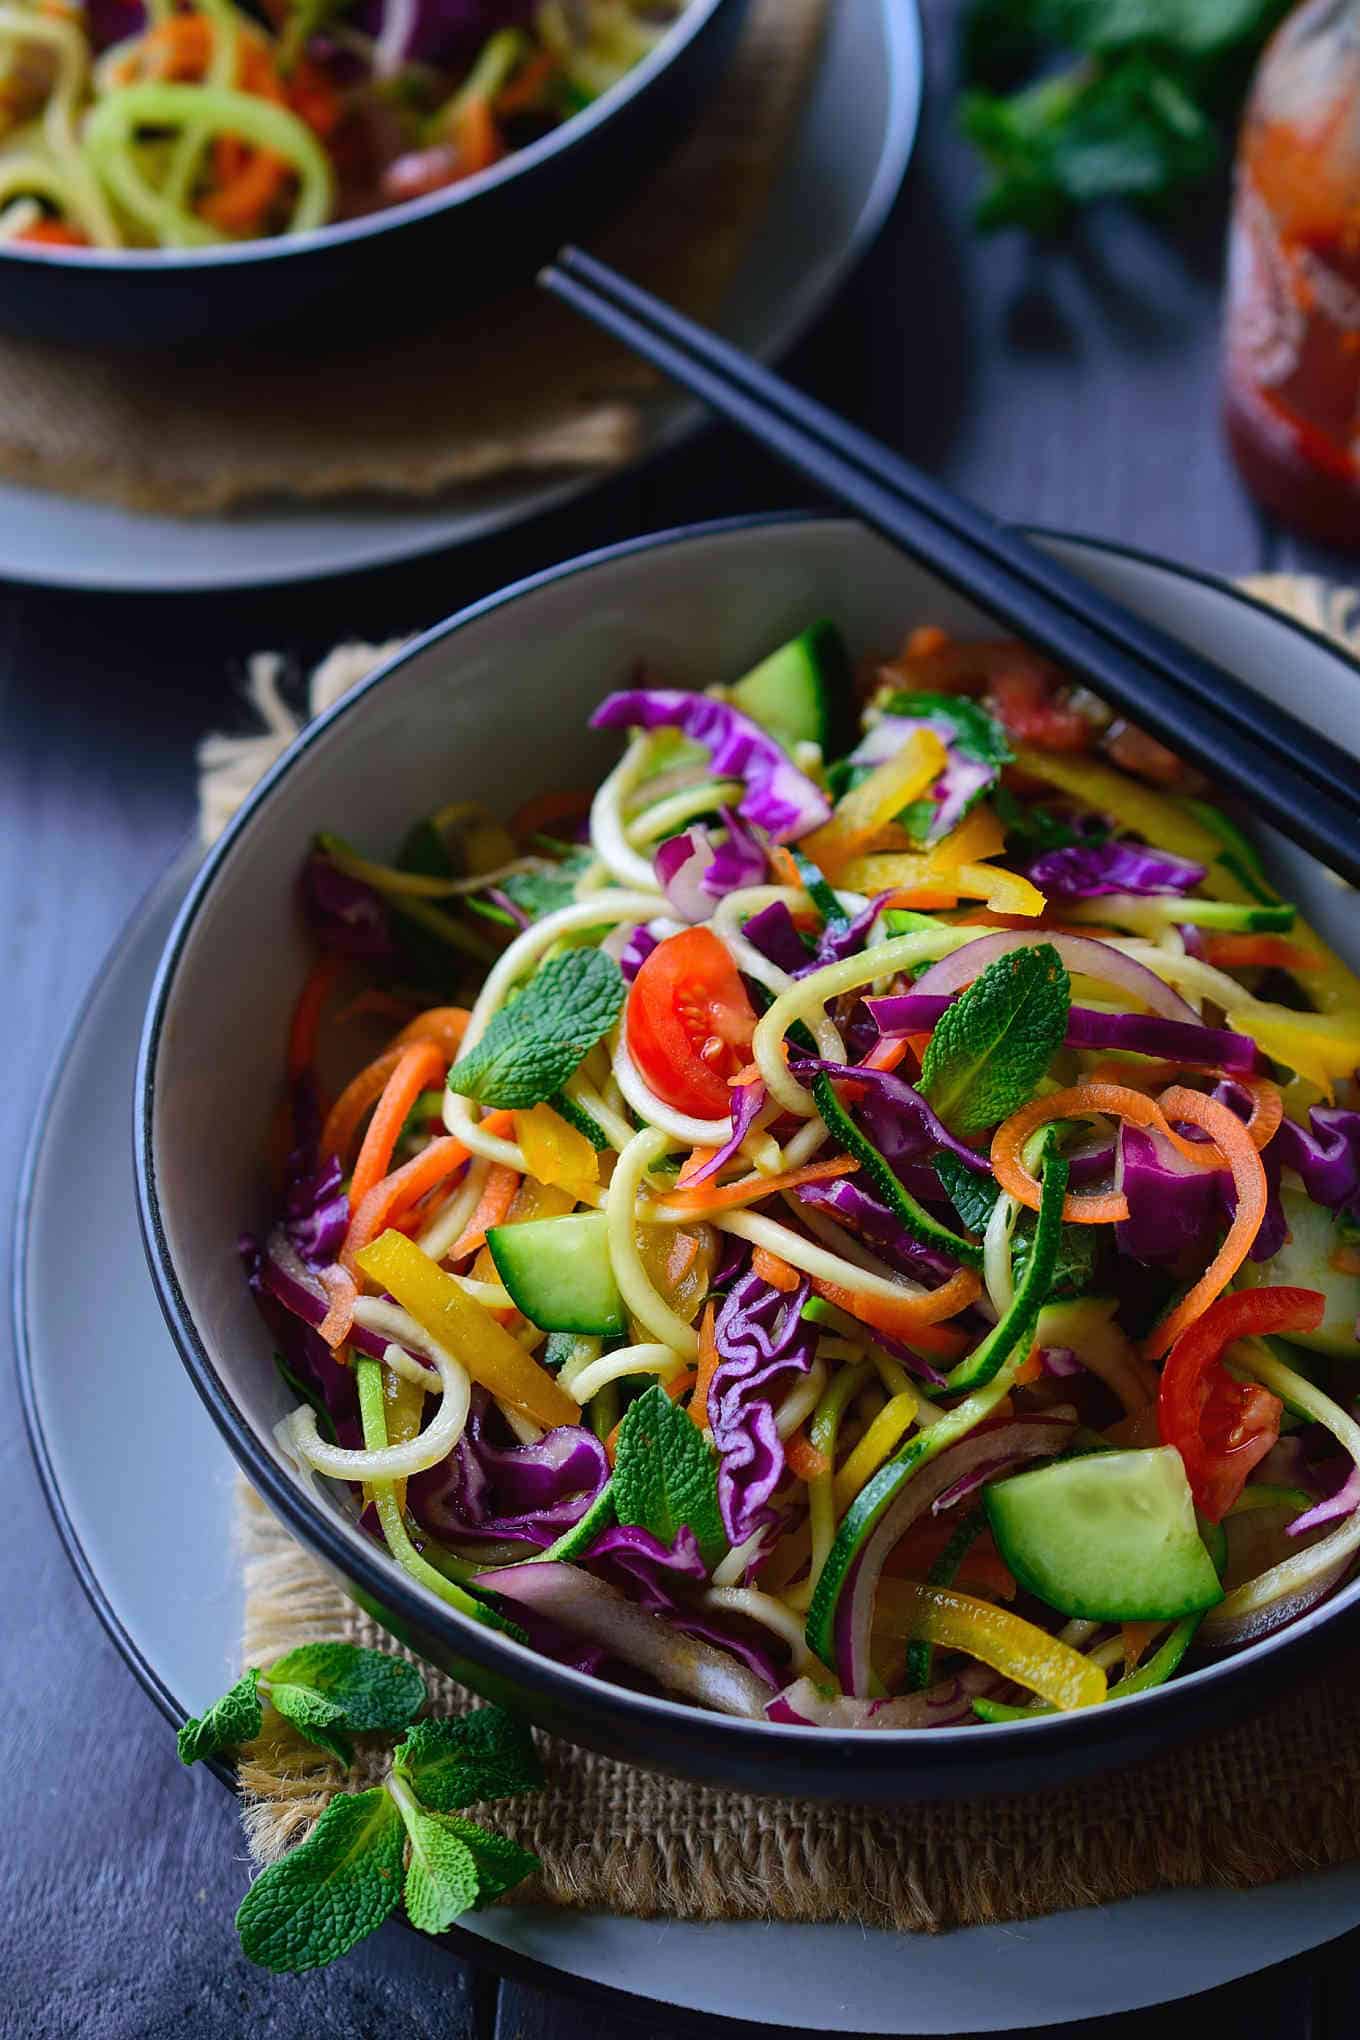 This raw vegan noodles salad recipe is super quick and easy to put together and is great served as a main or side dish. All you need is a selection of colourful vegetables, some pantry staples and a spiralizer.